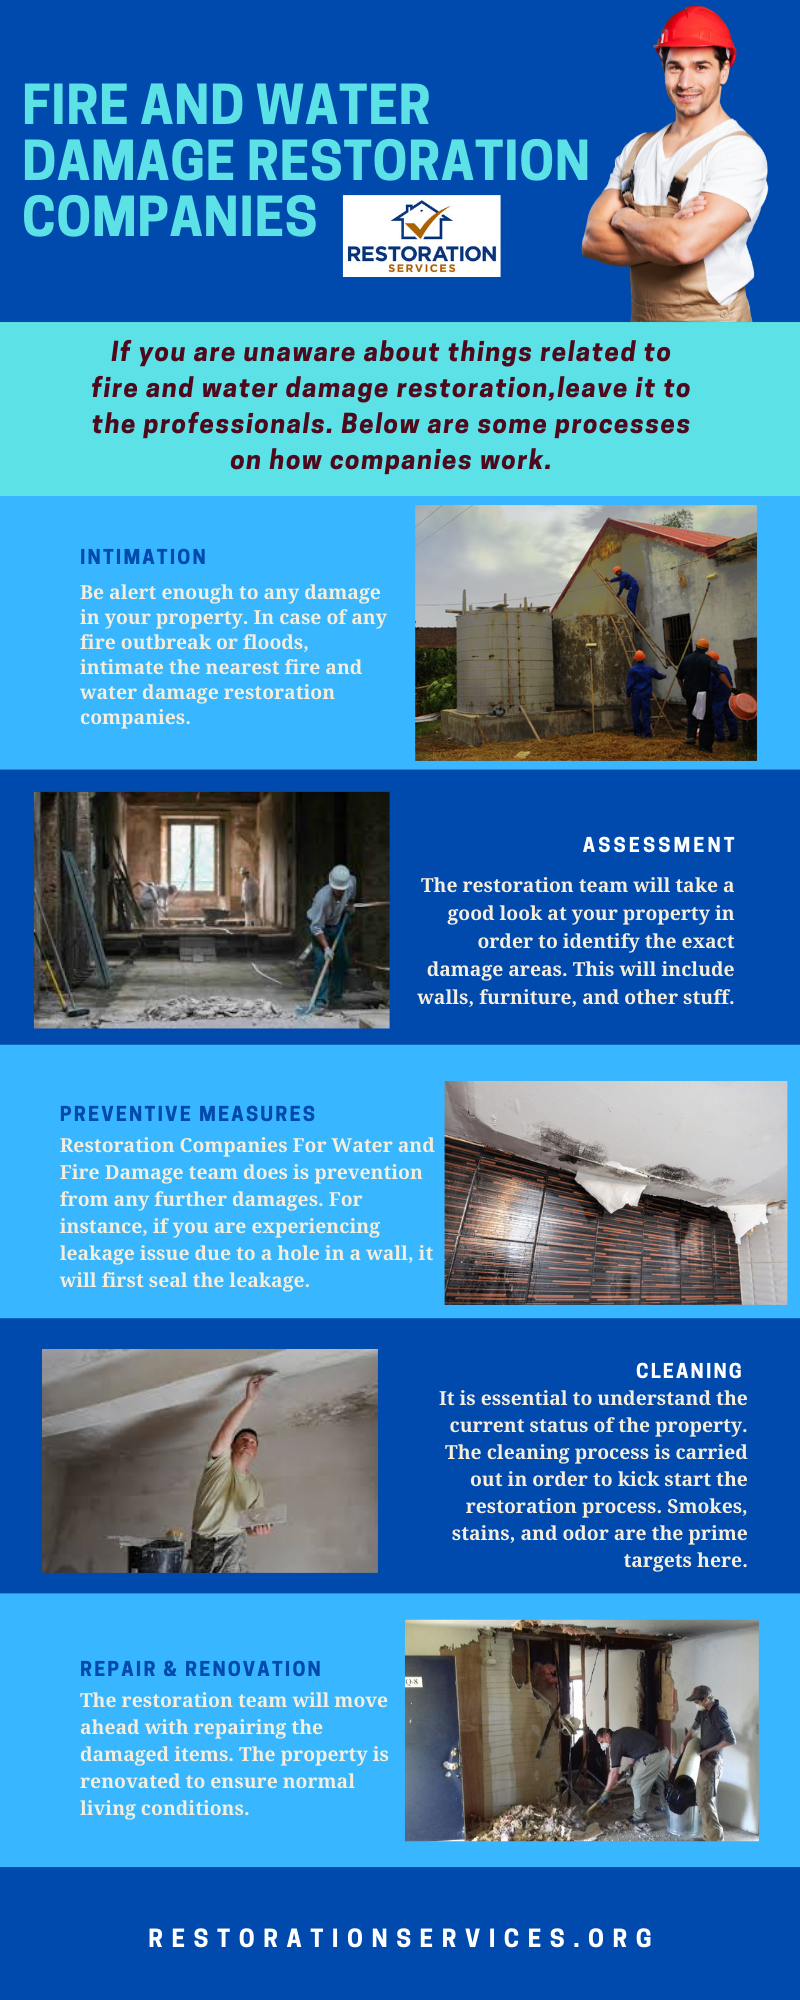 Fire and water damage restoration companies